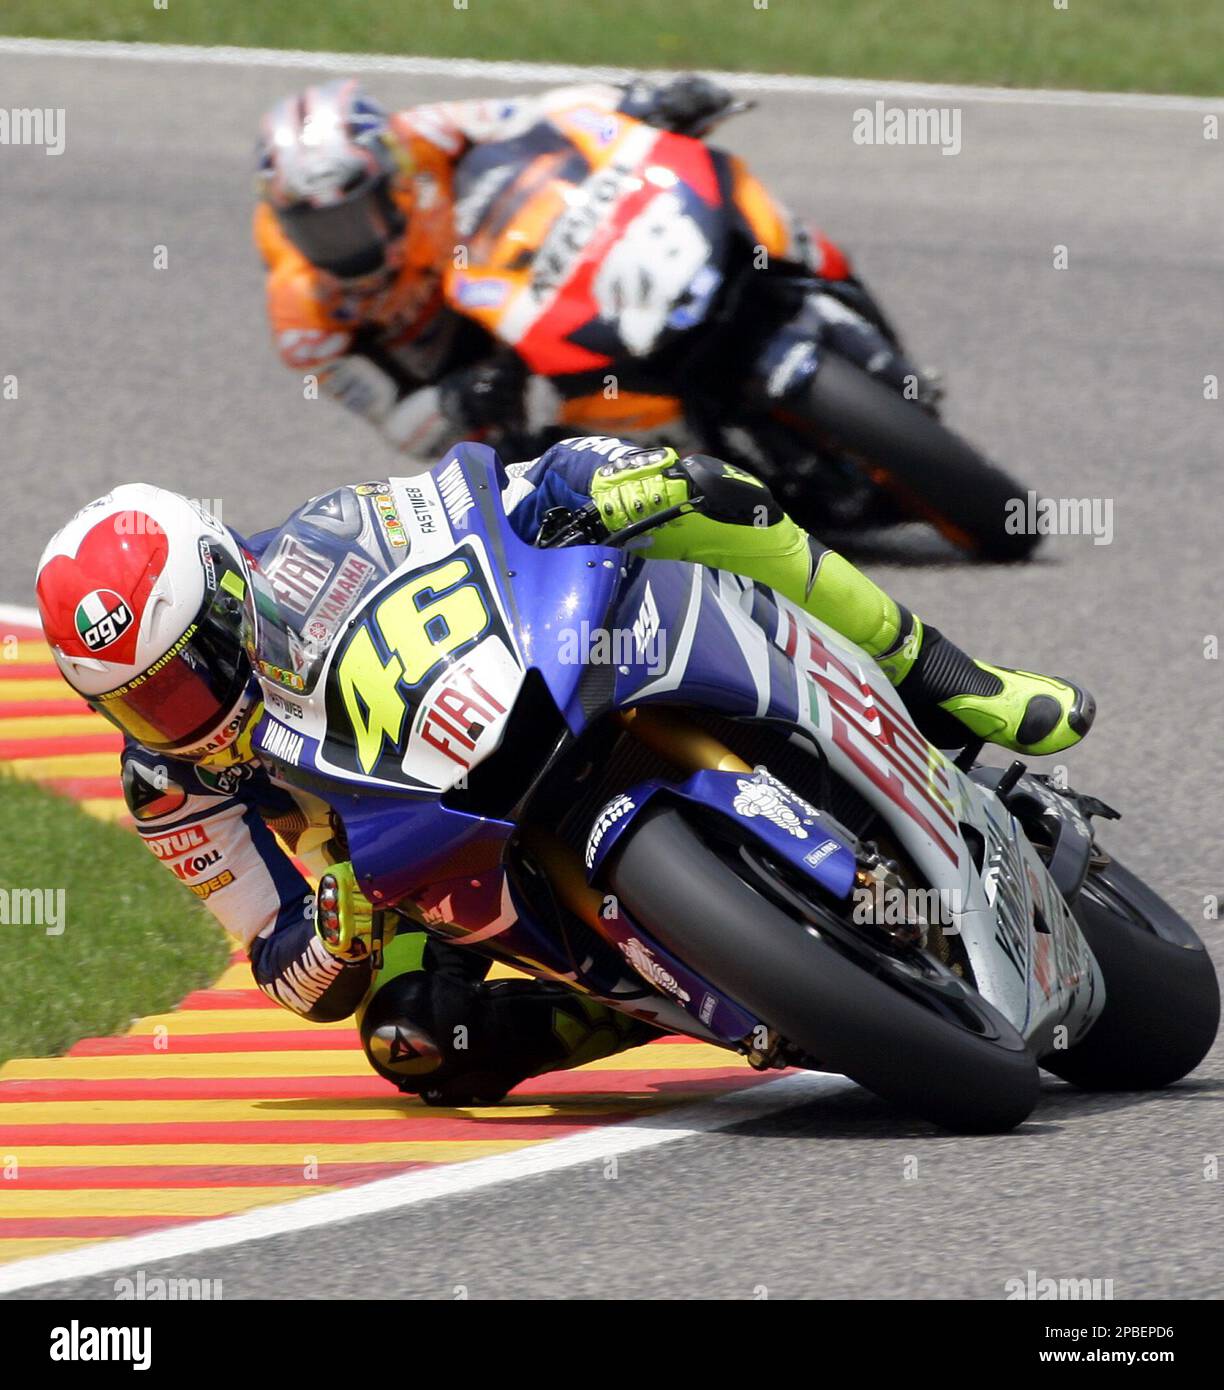 Yamaha driver Valentino Rossi, of Italy, leads Honda driver Dani Pedrosa,  of Spain, on a curve, during the Italian MotoGP, at the Mugello circuit, in  Scarperia, Italy, Sunday, June 3, 2007. Rossi